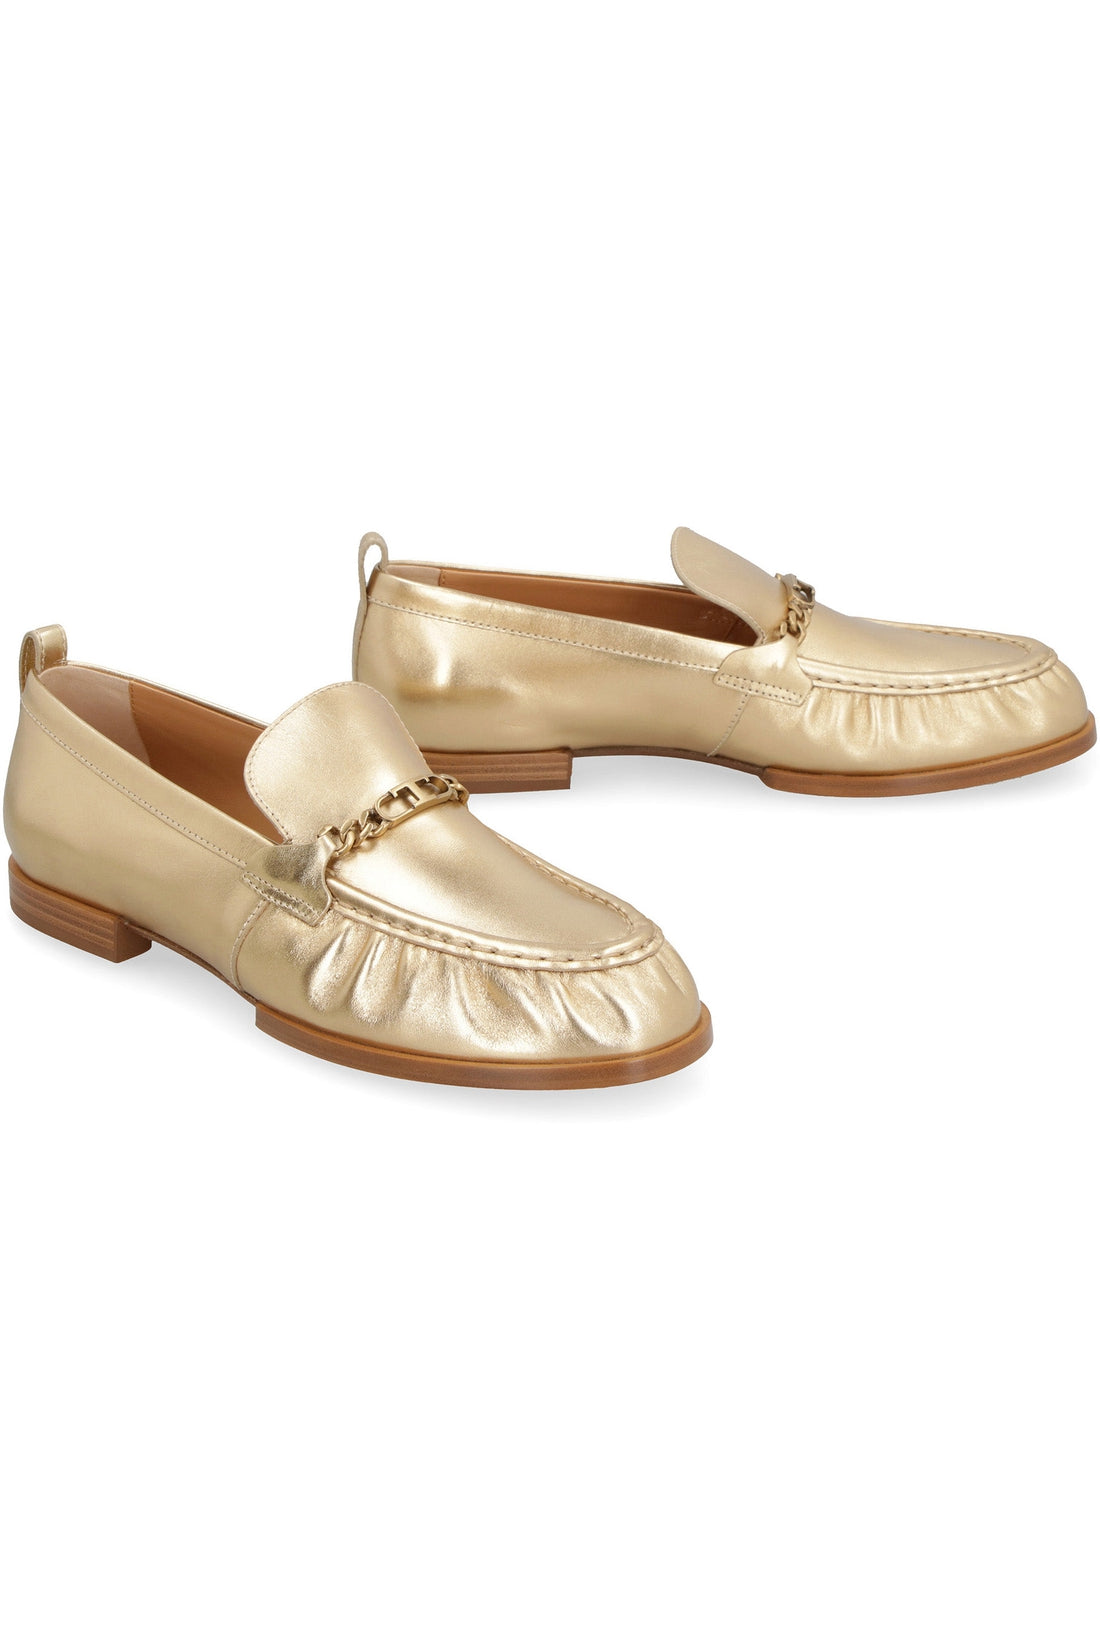 Tod's-OUTLET-SALE-Metallic leather loafers-ARCHIVIST